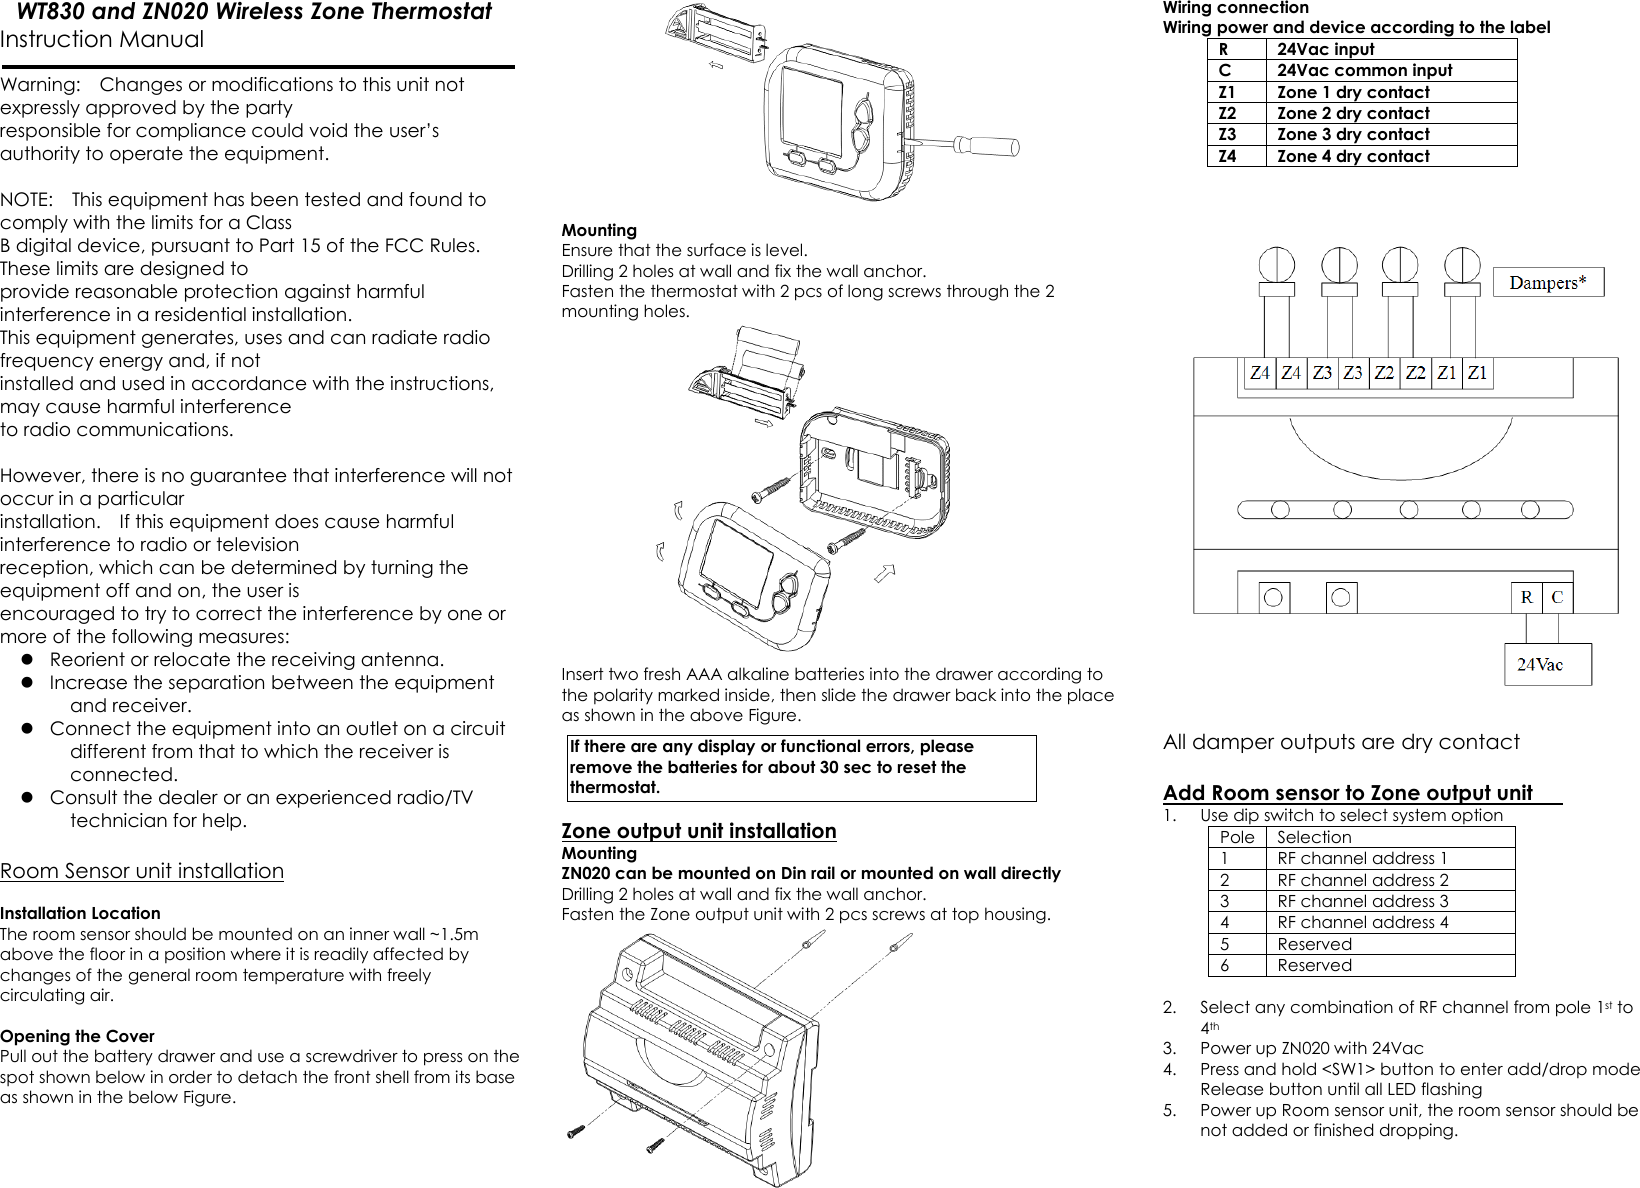  WT830 and ZN020 Wireless Zone Thermostat Instruction Manual                        Warning:    Changes or modifications to this unit not expressly approved by the party   responsible for compliance could void the user’s authority to operate the equipment.    NOTE:    This equipment has been tested and found to comply with the limits for a Class   B digital device, pursuant to Part 15 of the FCC Rules.   These limits are designed to   provide reasonable protection against harmful interference in a residential installation.     This equipment generates, uses and can radiate radio frequency energy and, if not   installed and used in accordance with the instructions, may cause harmful interference   to radio communications.      However, there is no guarantee that interference will not occur in a particular   installation.    If this equipment does cause harmful interference to radio or television   reception, which can be determined by turning the equipment off and on, the user is   encouraged to try to correct the interference by one or more of the following measures:    Reorient or relocate the receiving antenna.  Increase the separation between the equipment and receiver.  Connect the equipment into an outlet on a circuit different from that to which the receiver is connected.  Consult the dealer or an experienced radio/TV technician for help.      Room Sensor unit installation  Installation Location   The room sensor should be mounted on an inner wall ~1.5m above the floor in a position where it is readily affected by changes of the general room temperature with freely circulating air.    Opening the Cover Pull out the battery drawer and use a screwdriver to press on the spot shown below in order to detach the front shell from its base as shown in the below Figure.  Mounting Ensure that the surface is level. Drilling 2 holes at wall and fix the wall anchor. Fasten the thermostat with 2 pcs of long screws through the 2 mounting holes.    Insert two fresh AAA alkaline batteries into the drawer according to the polarity marked inside, then slide the drawer back into the place as shown in the above Figure.         Zone output unit installation Mounting ZN020 can be mounted on Din rail or mounted on wall directly Drilling 2 holes at wall and fix the wall anchor. Fasten the Zone output unit with 2 pcs screws at top housing.  Wiring connection Wiring power and device according to the label R  24Vac input C  24Vac common input Z1  Zone 1 dry contact Z2  Zone 2 dry contact Z3  Zone 3 dry contact Z4  Zone 4 dry contact      All damper outputs are dry contact  Add Room sensor to Zone output unit   1. Use dip switch to select system option Pole  Selection 1  RF channel address 1 2  RF channel address 2 3  RF channel address 3 4  RF channel address 4 5  Reserved 6  Reserved  2. Select any combination of RF channel from pole 1st to 4th   3. Power up ZN020 with 24Vac 4. Press and hold &lt;SW1&gt; button to enter add/drop mode Release button until all LED flashing 5. Power up Room sensor unit, the room sensor should be not added or finished dropping.  If there are any display or functional errors, please remove the batteries for about 30 sec to reset the thermostat. 